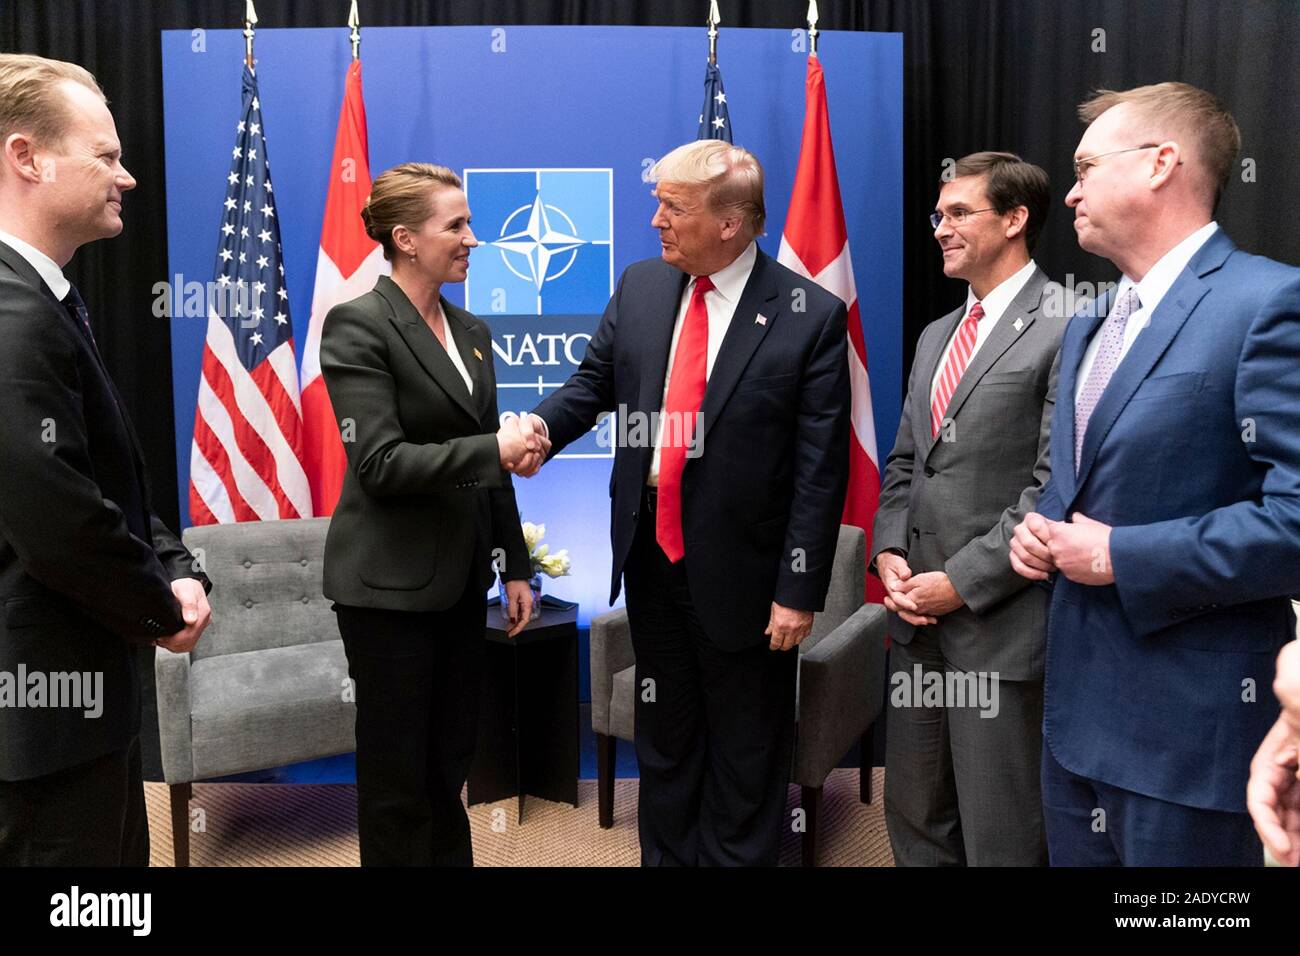 U.S. President Donald Trump shakes hands with Danish Prime Minister Mette Frederiksen prior to a bilateral meeting on the sidelines of the NATO Summit December 4, 2019 in Watford, Hertfordshire, United Kingdom. Stock Photo